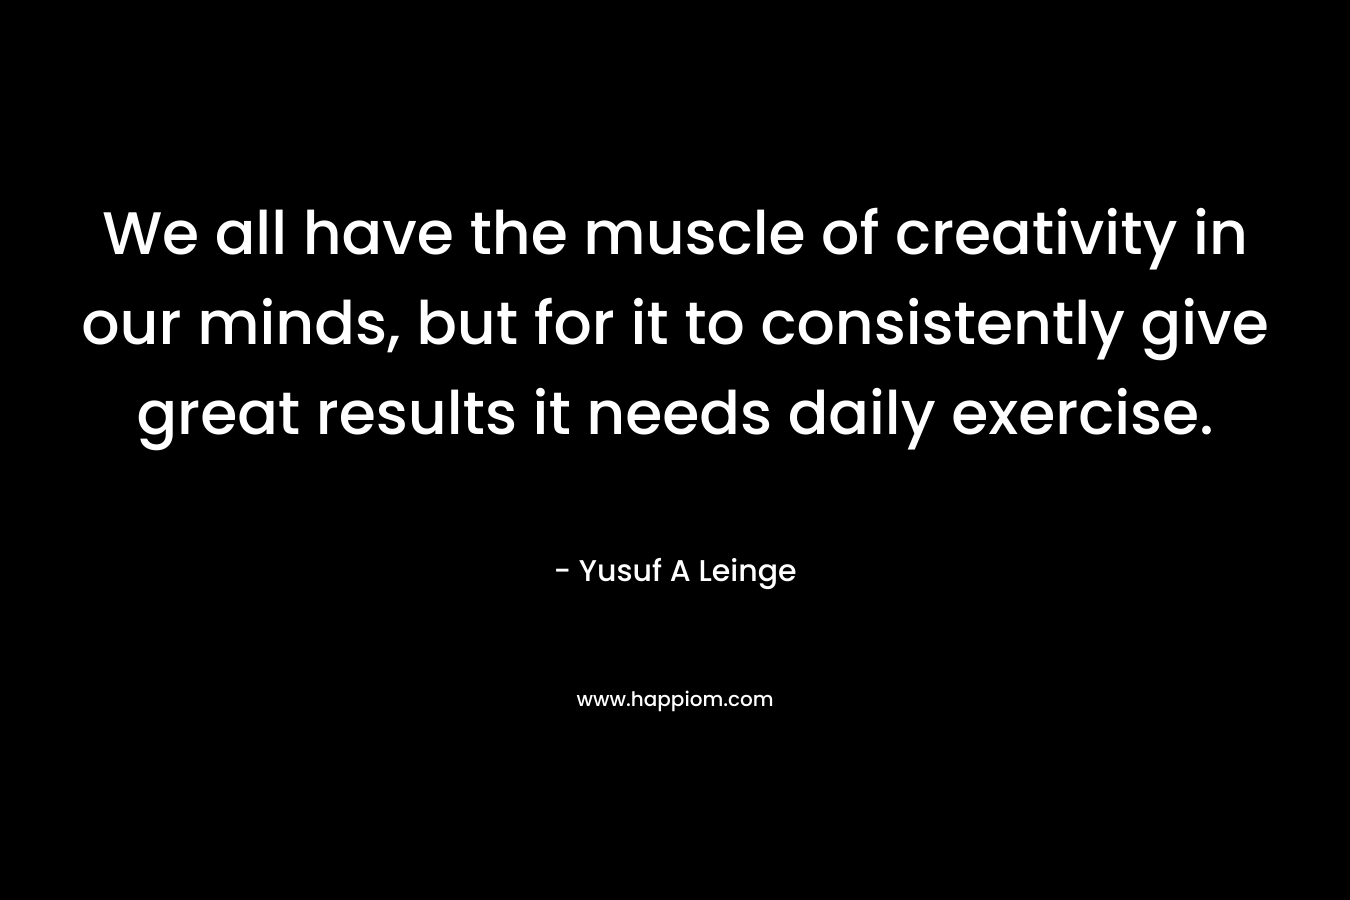 We all have the muscle of creativity in our minds, but for it to consistently give great results it needs daily exercise. – Yusuf A Leinge